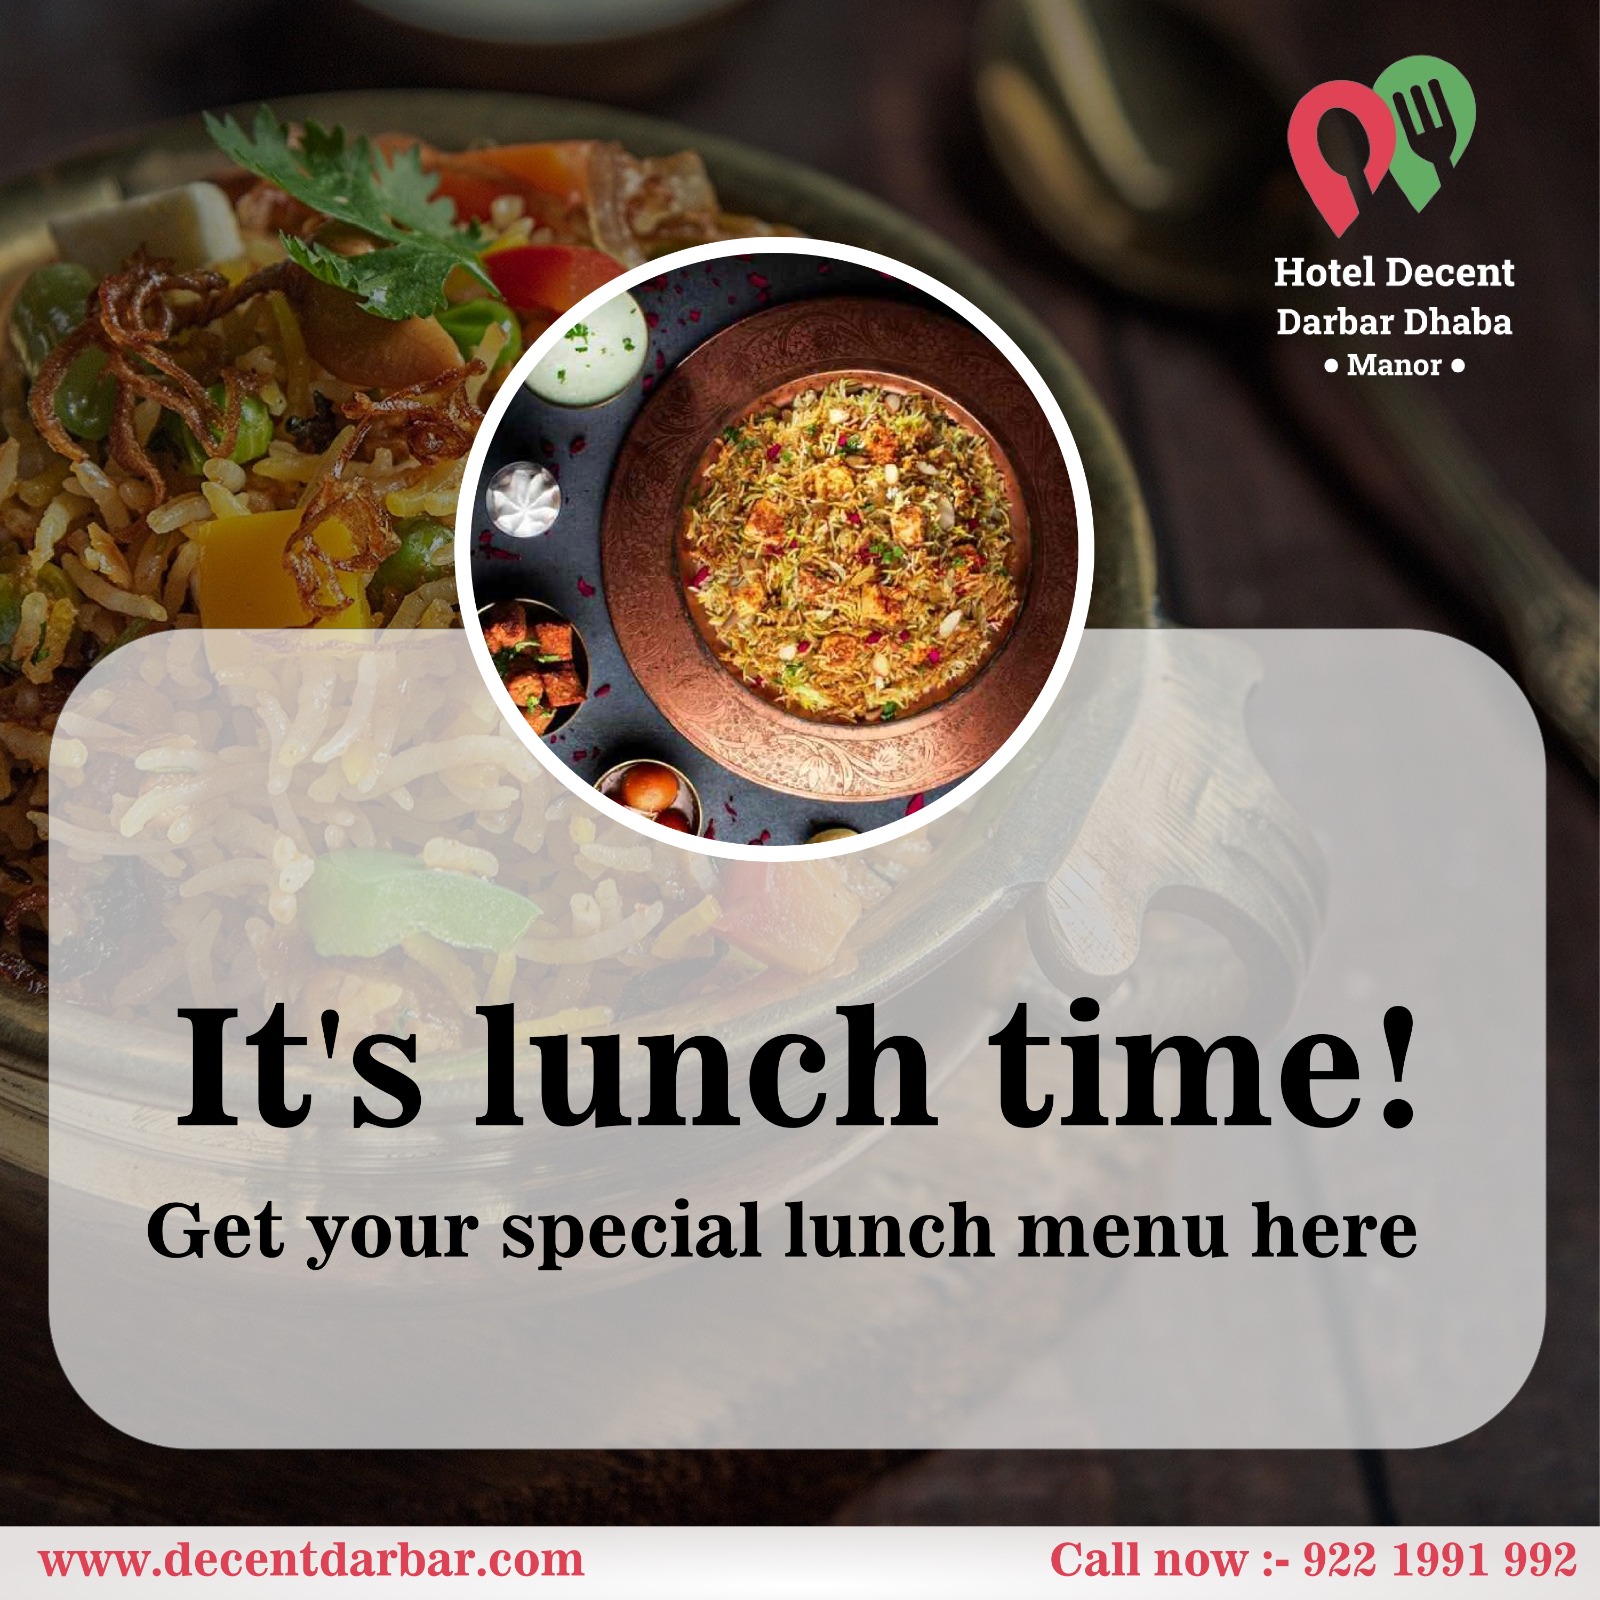 It's Lunch Time at Hotel Decent Darbar Dhaba